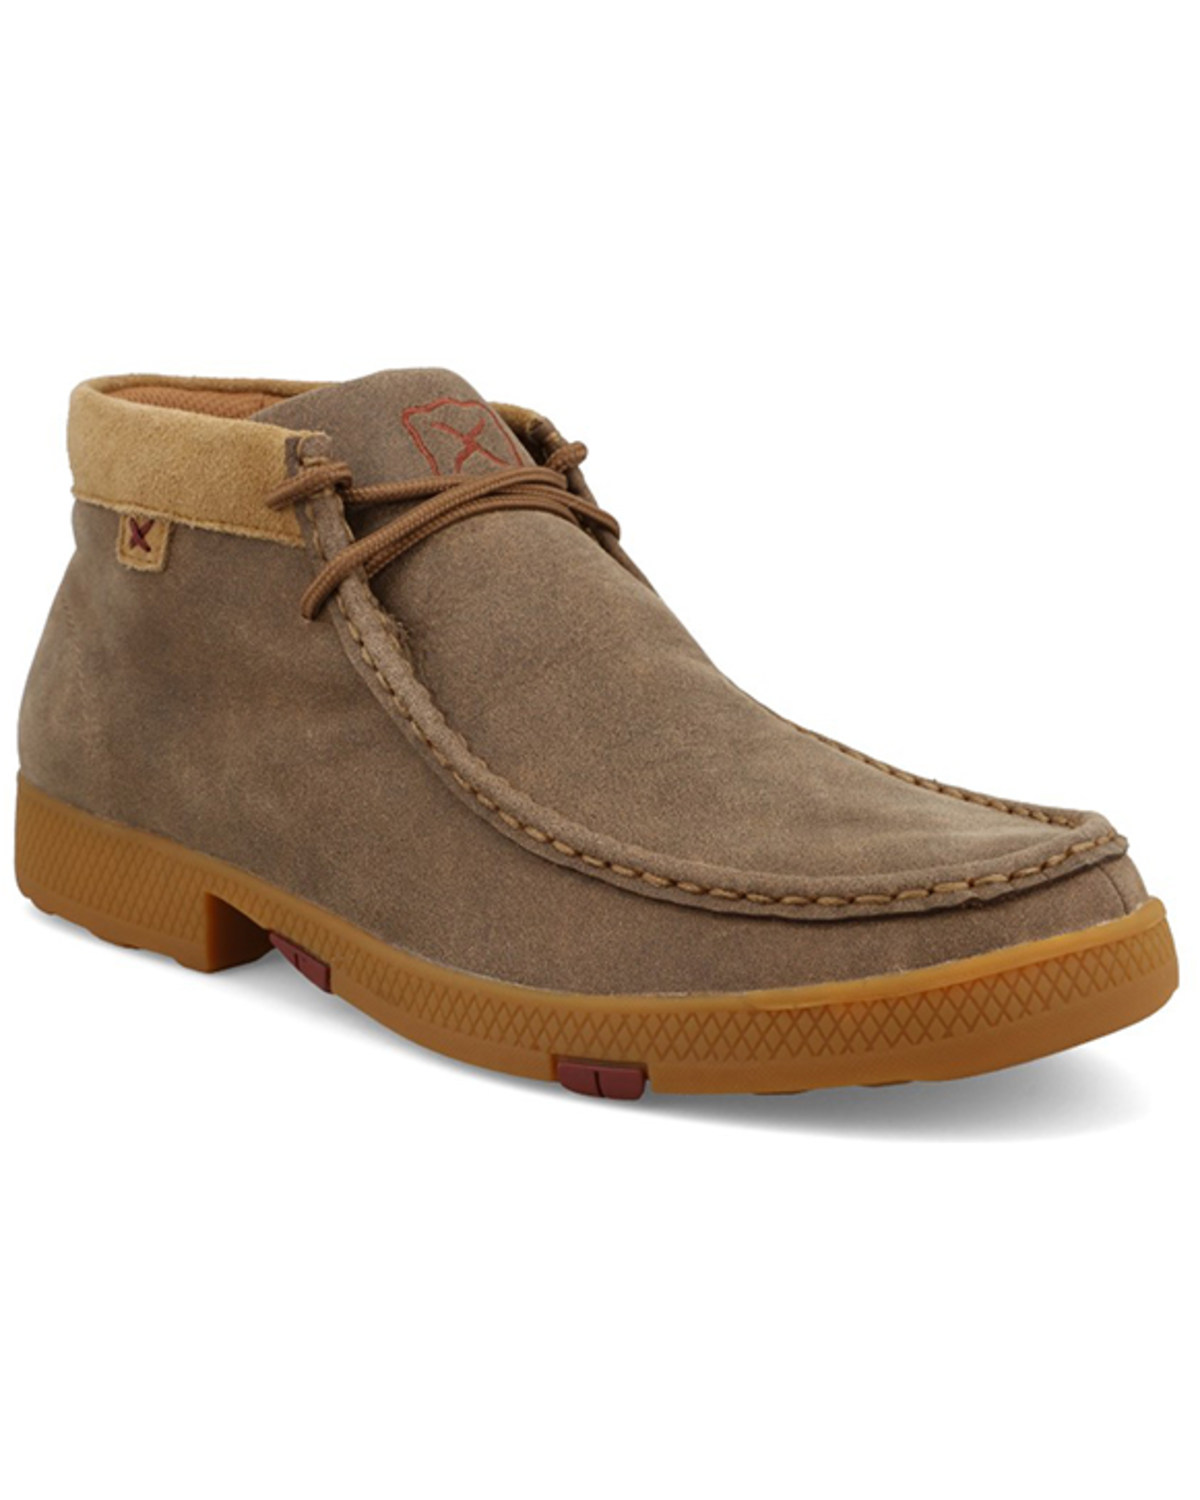 Twisted X Men's Outdoor Casual Shoes - Moc Toe